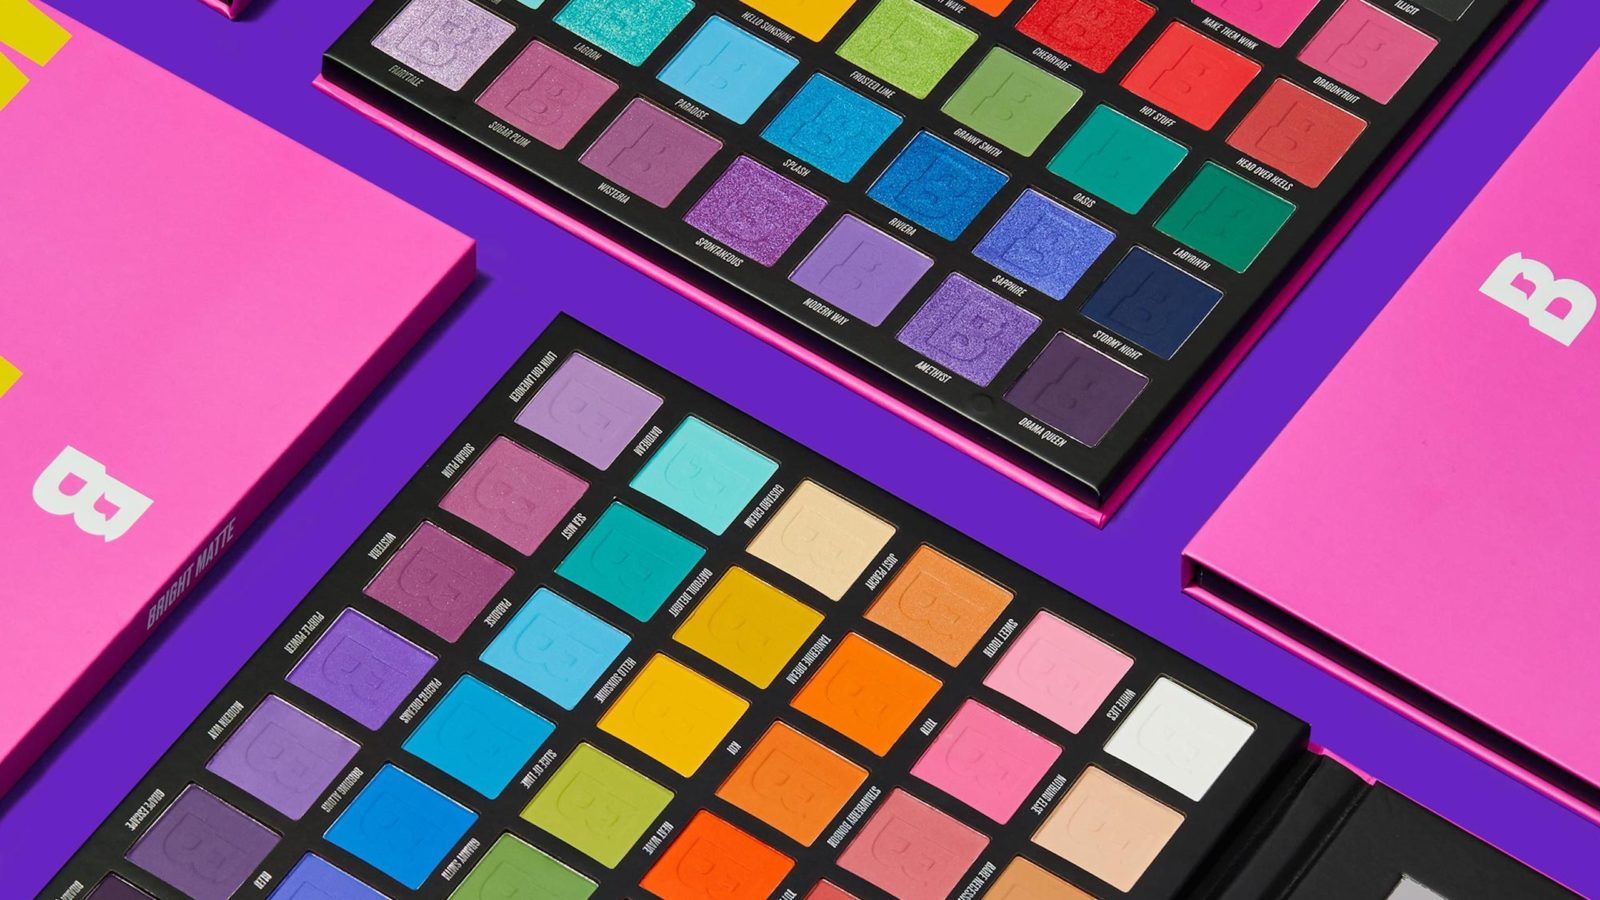 5 snatchin’ eyeshadow palettes from indie beauty brands for the ultimate Y2K look